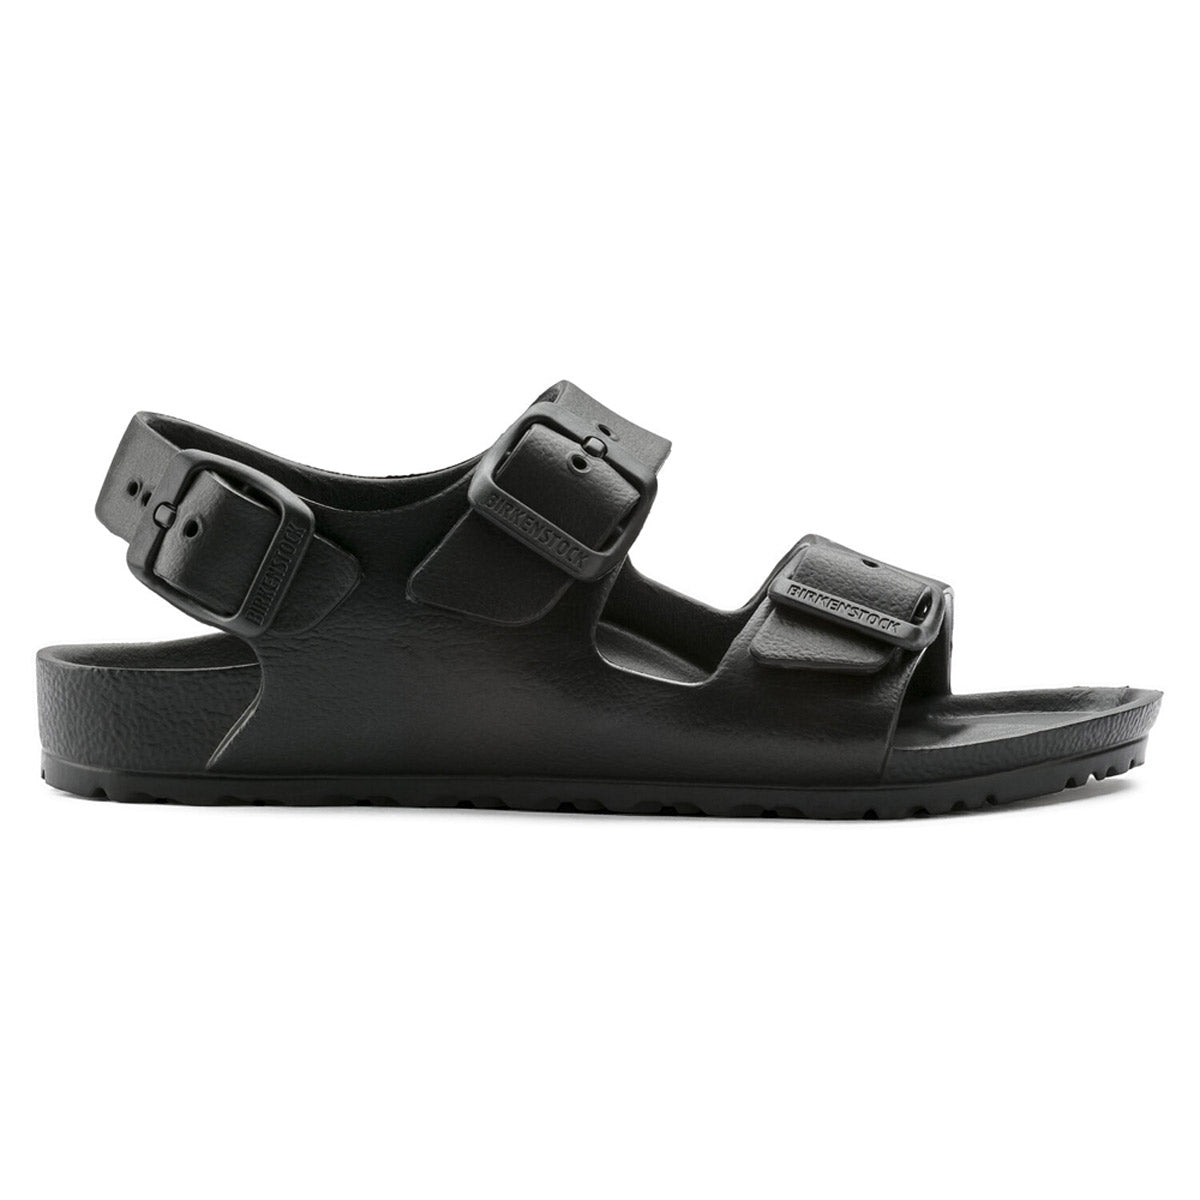 A black, two-strap Birkenstock Milano Eva sandal featuring an anatomically shaped footbed on a white background.